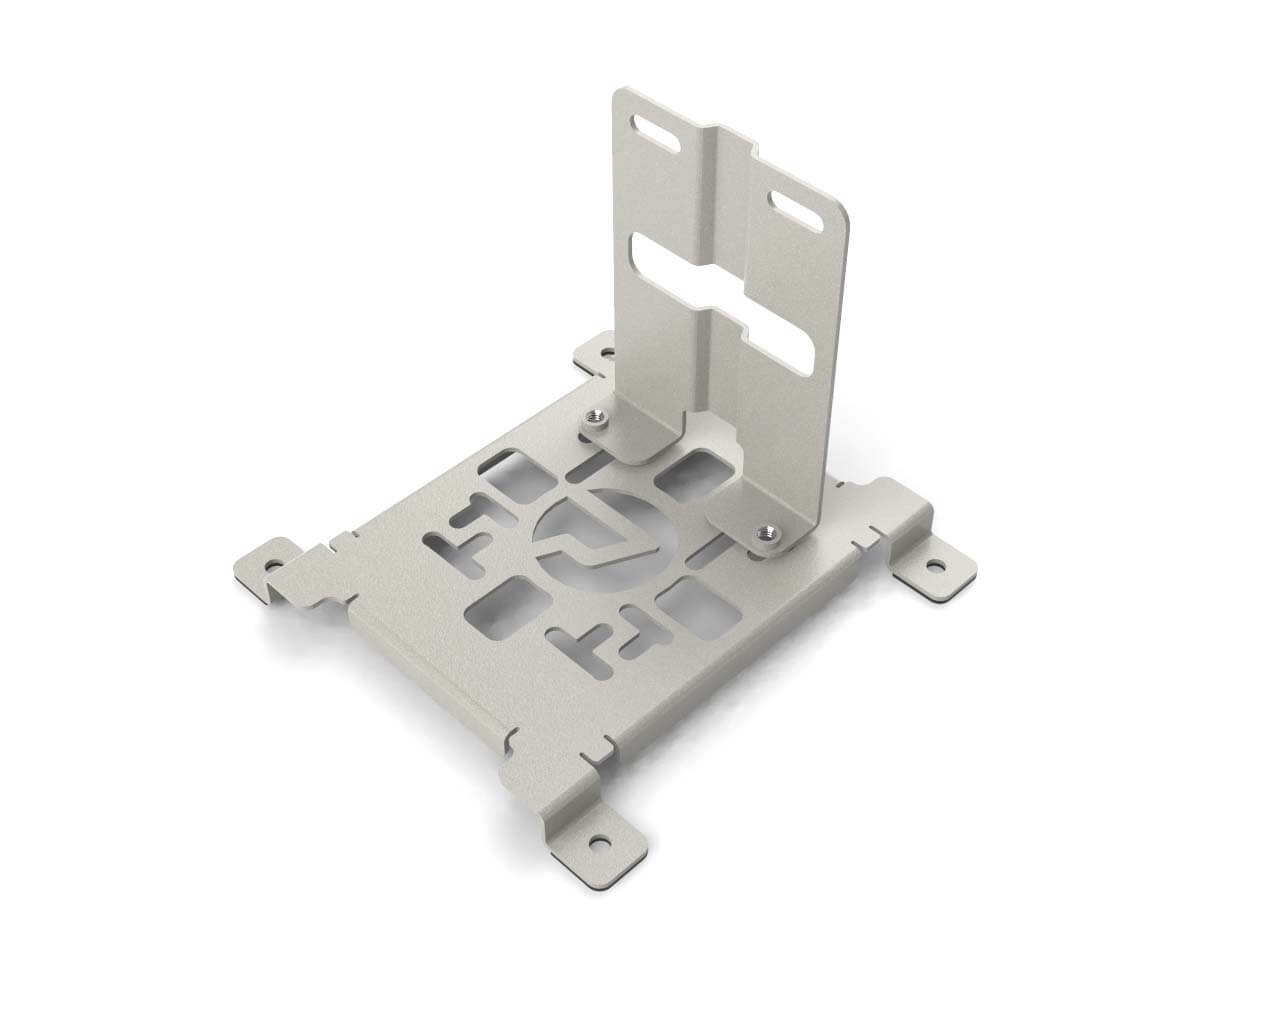 PrimoChill SX CTR2 Spider Mount Bracket Kit - 120mm Series - PrimoChill - KEEPING IT COOL TX Matte Silver